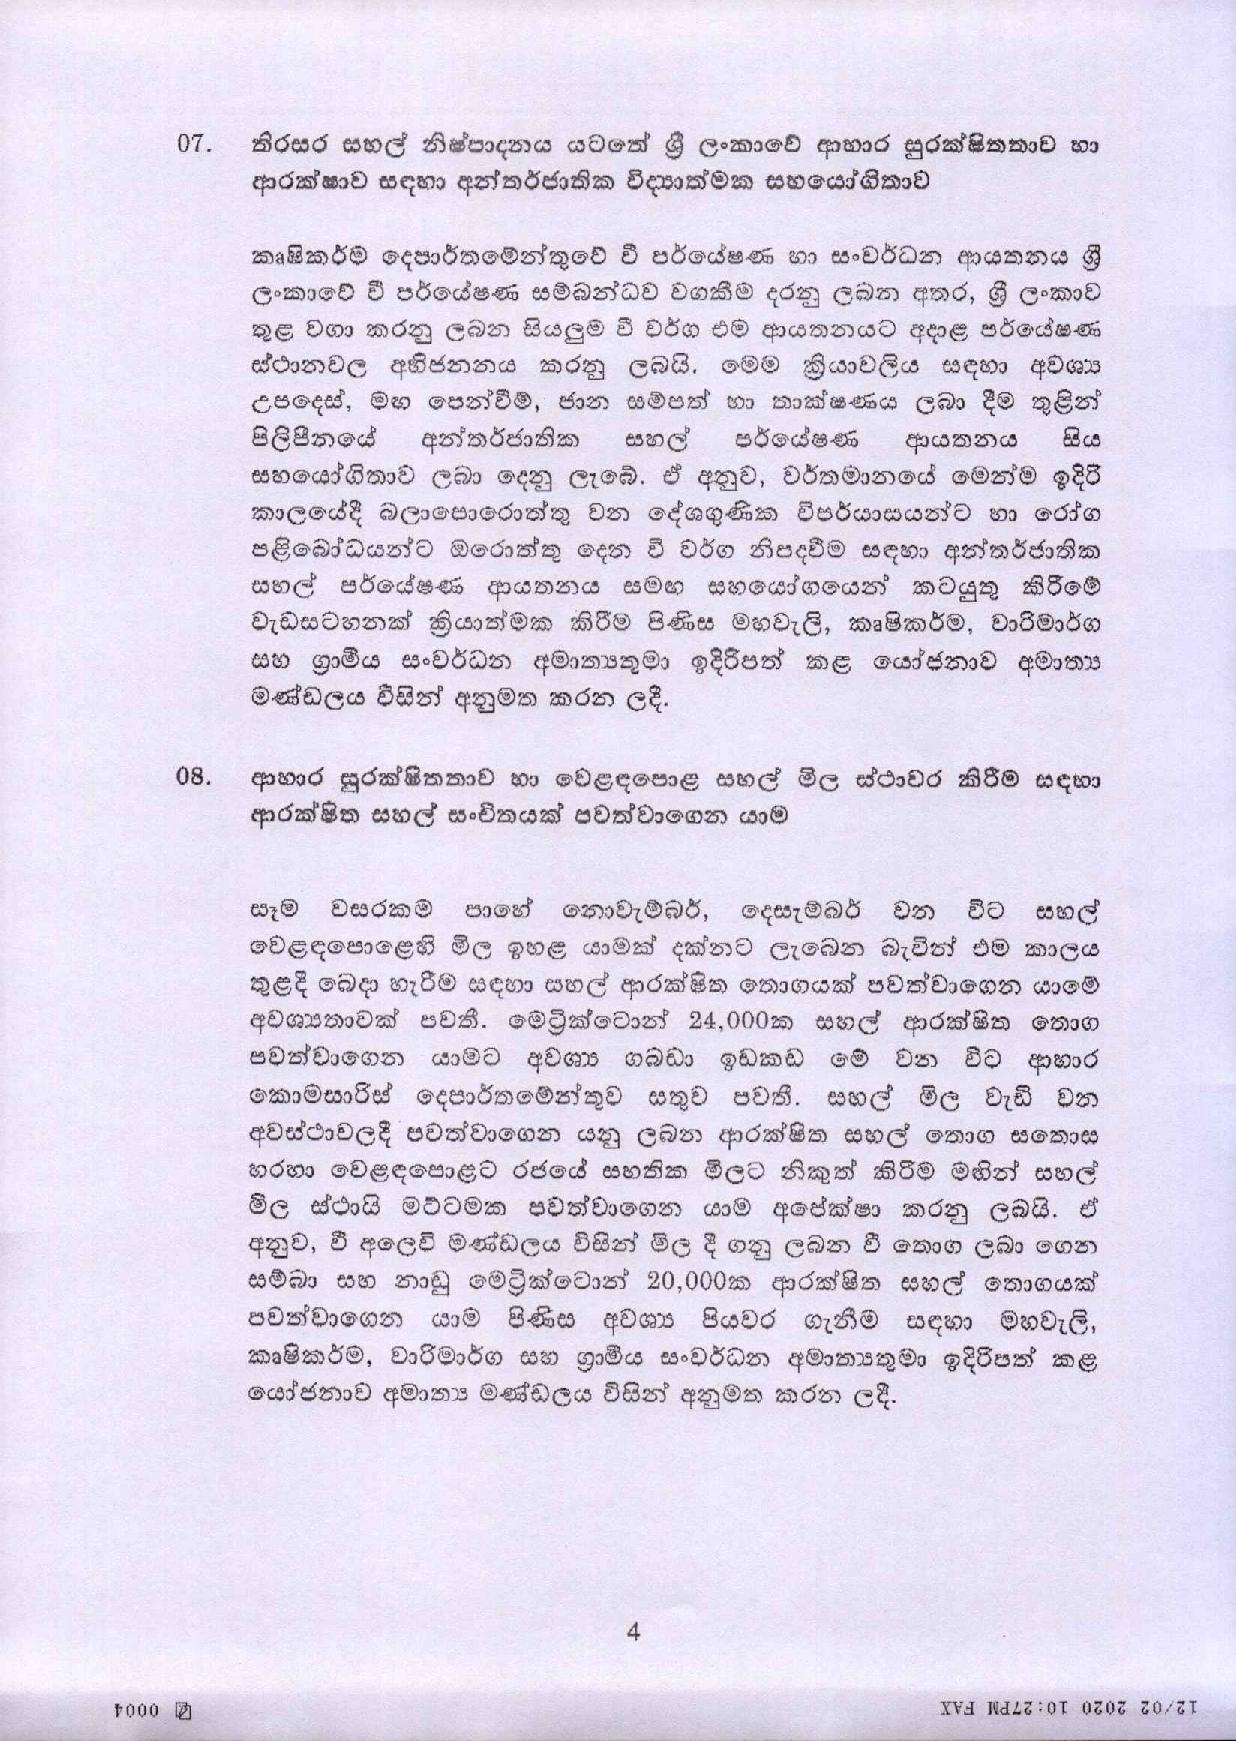 Cabinet Decision on 12.02.2020 page 004